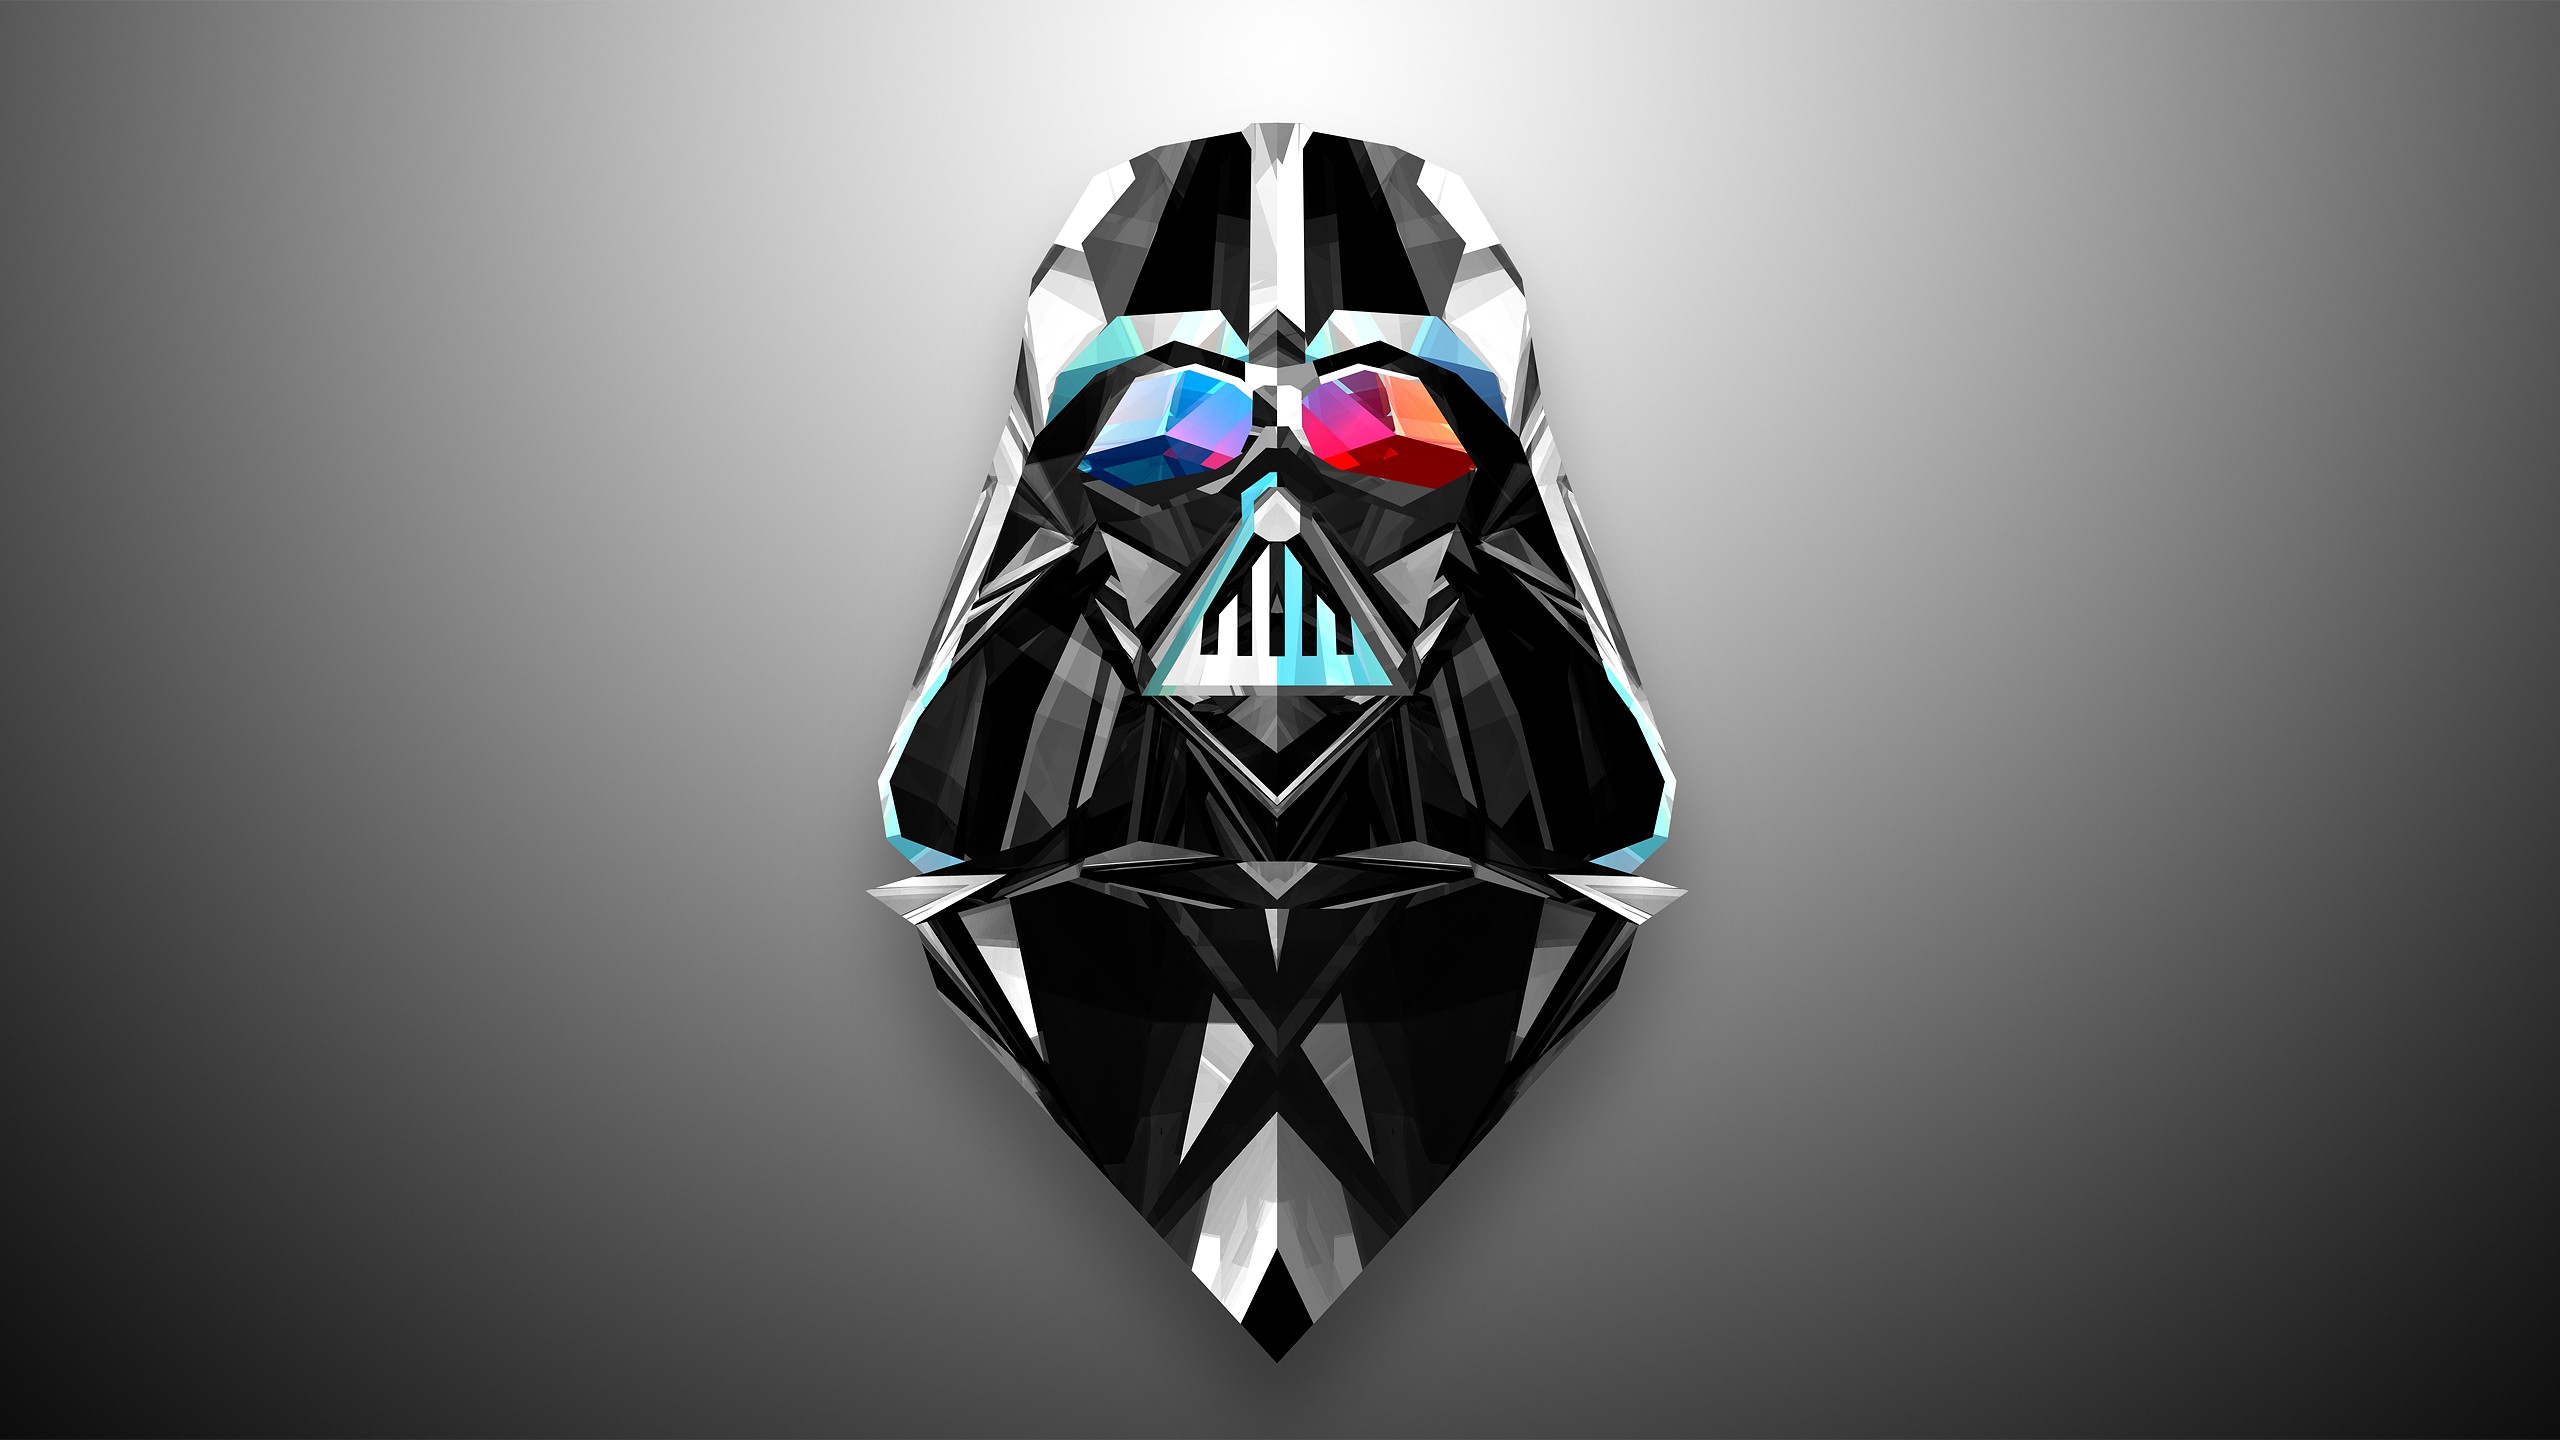 darth vader, movie collection of HD images